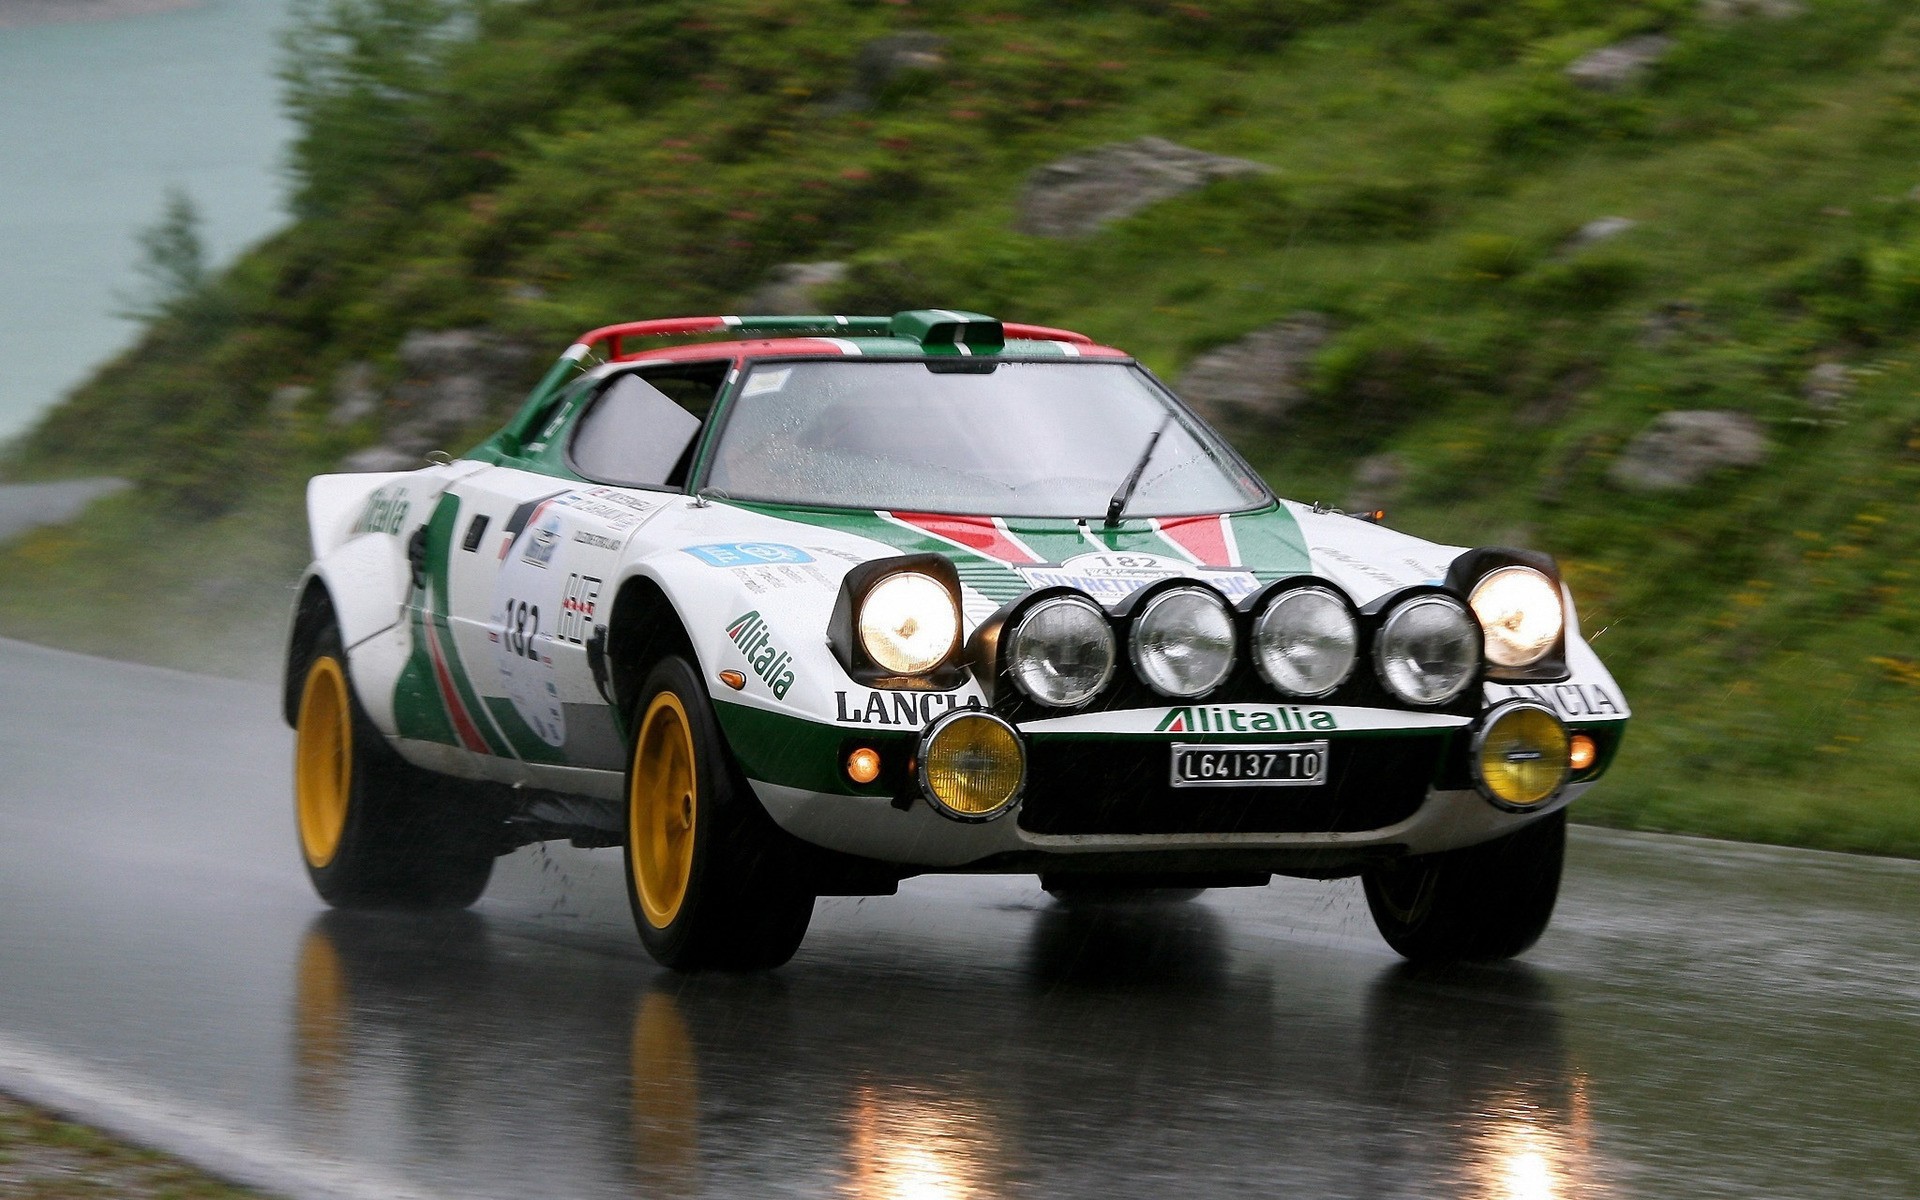 Lancia Stratos Car Racing Race Cars Pop Up Headlights Castrol Livery Colored Wheels 1920x1200